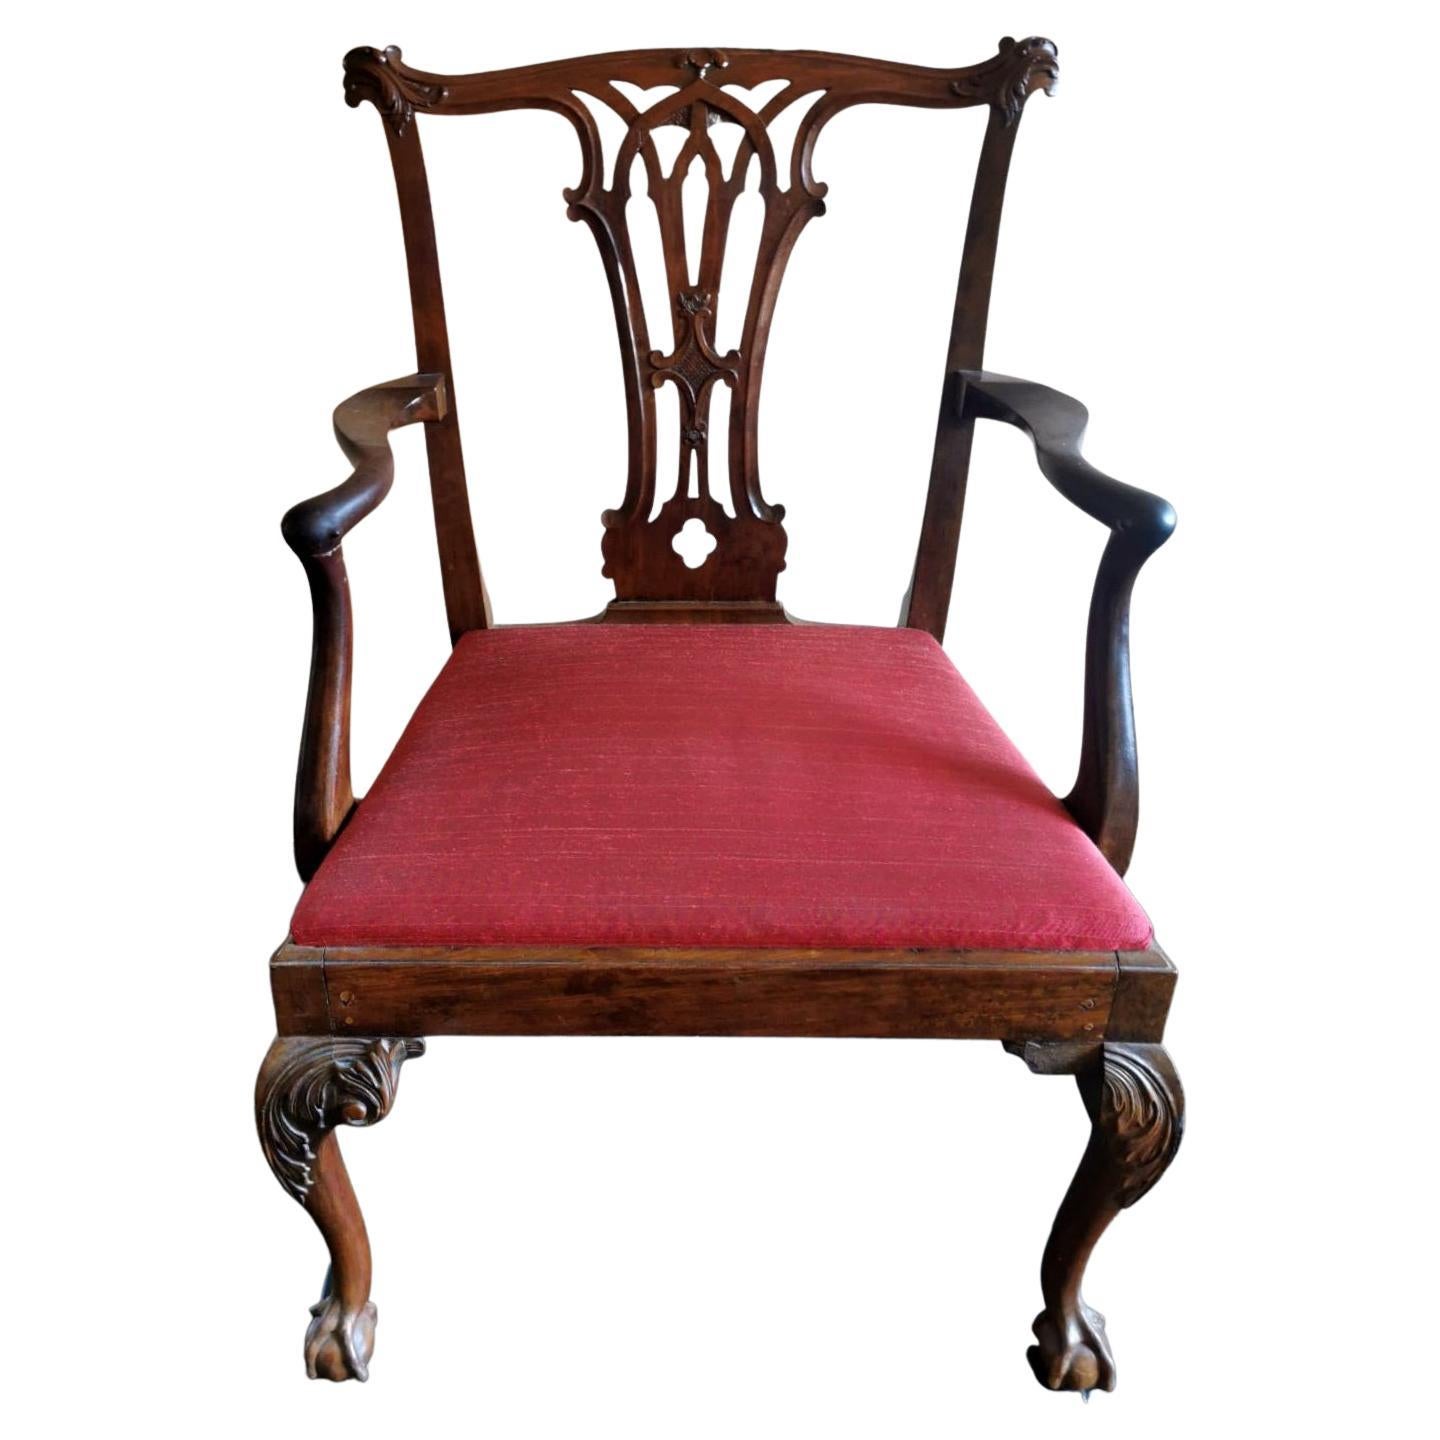 Chippendale Style English Chair "Antique Master" with Armrests